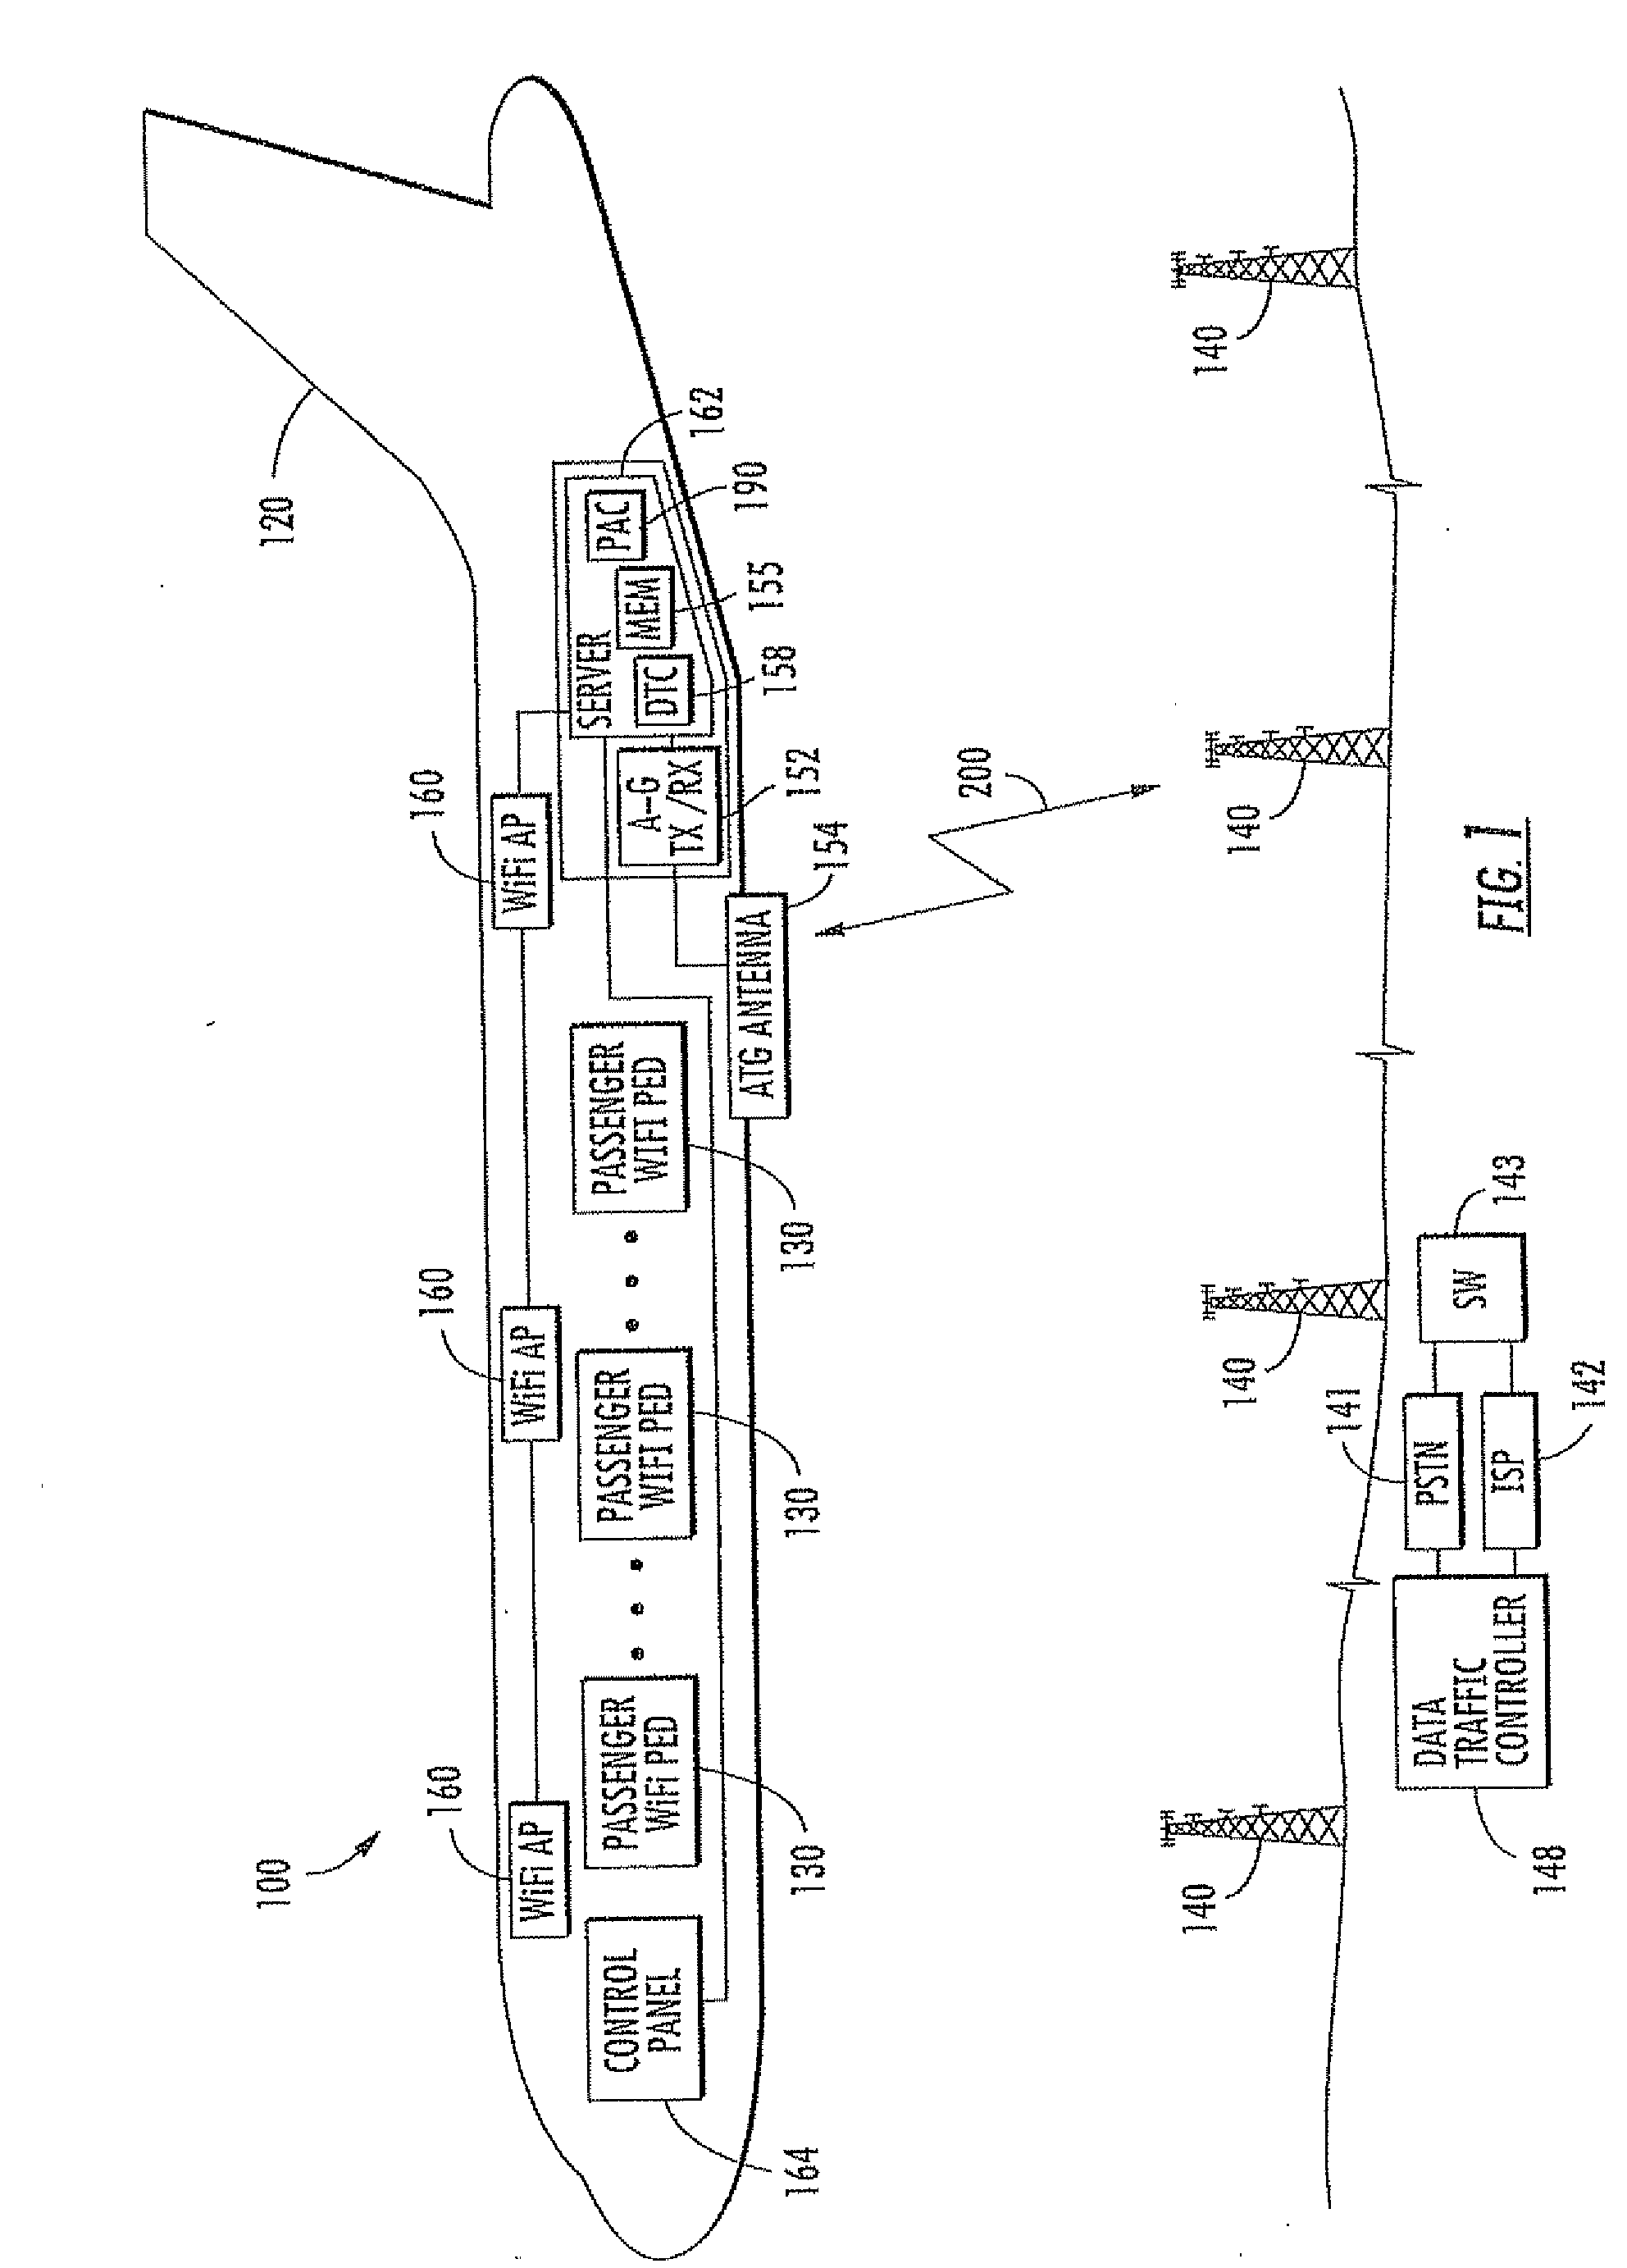 Aircraft communications system using whitelists to control access and associated methods